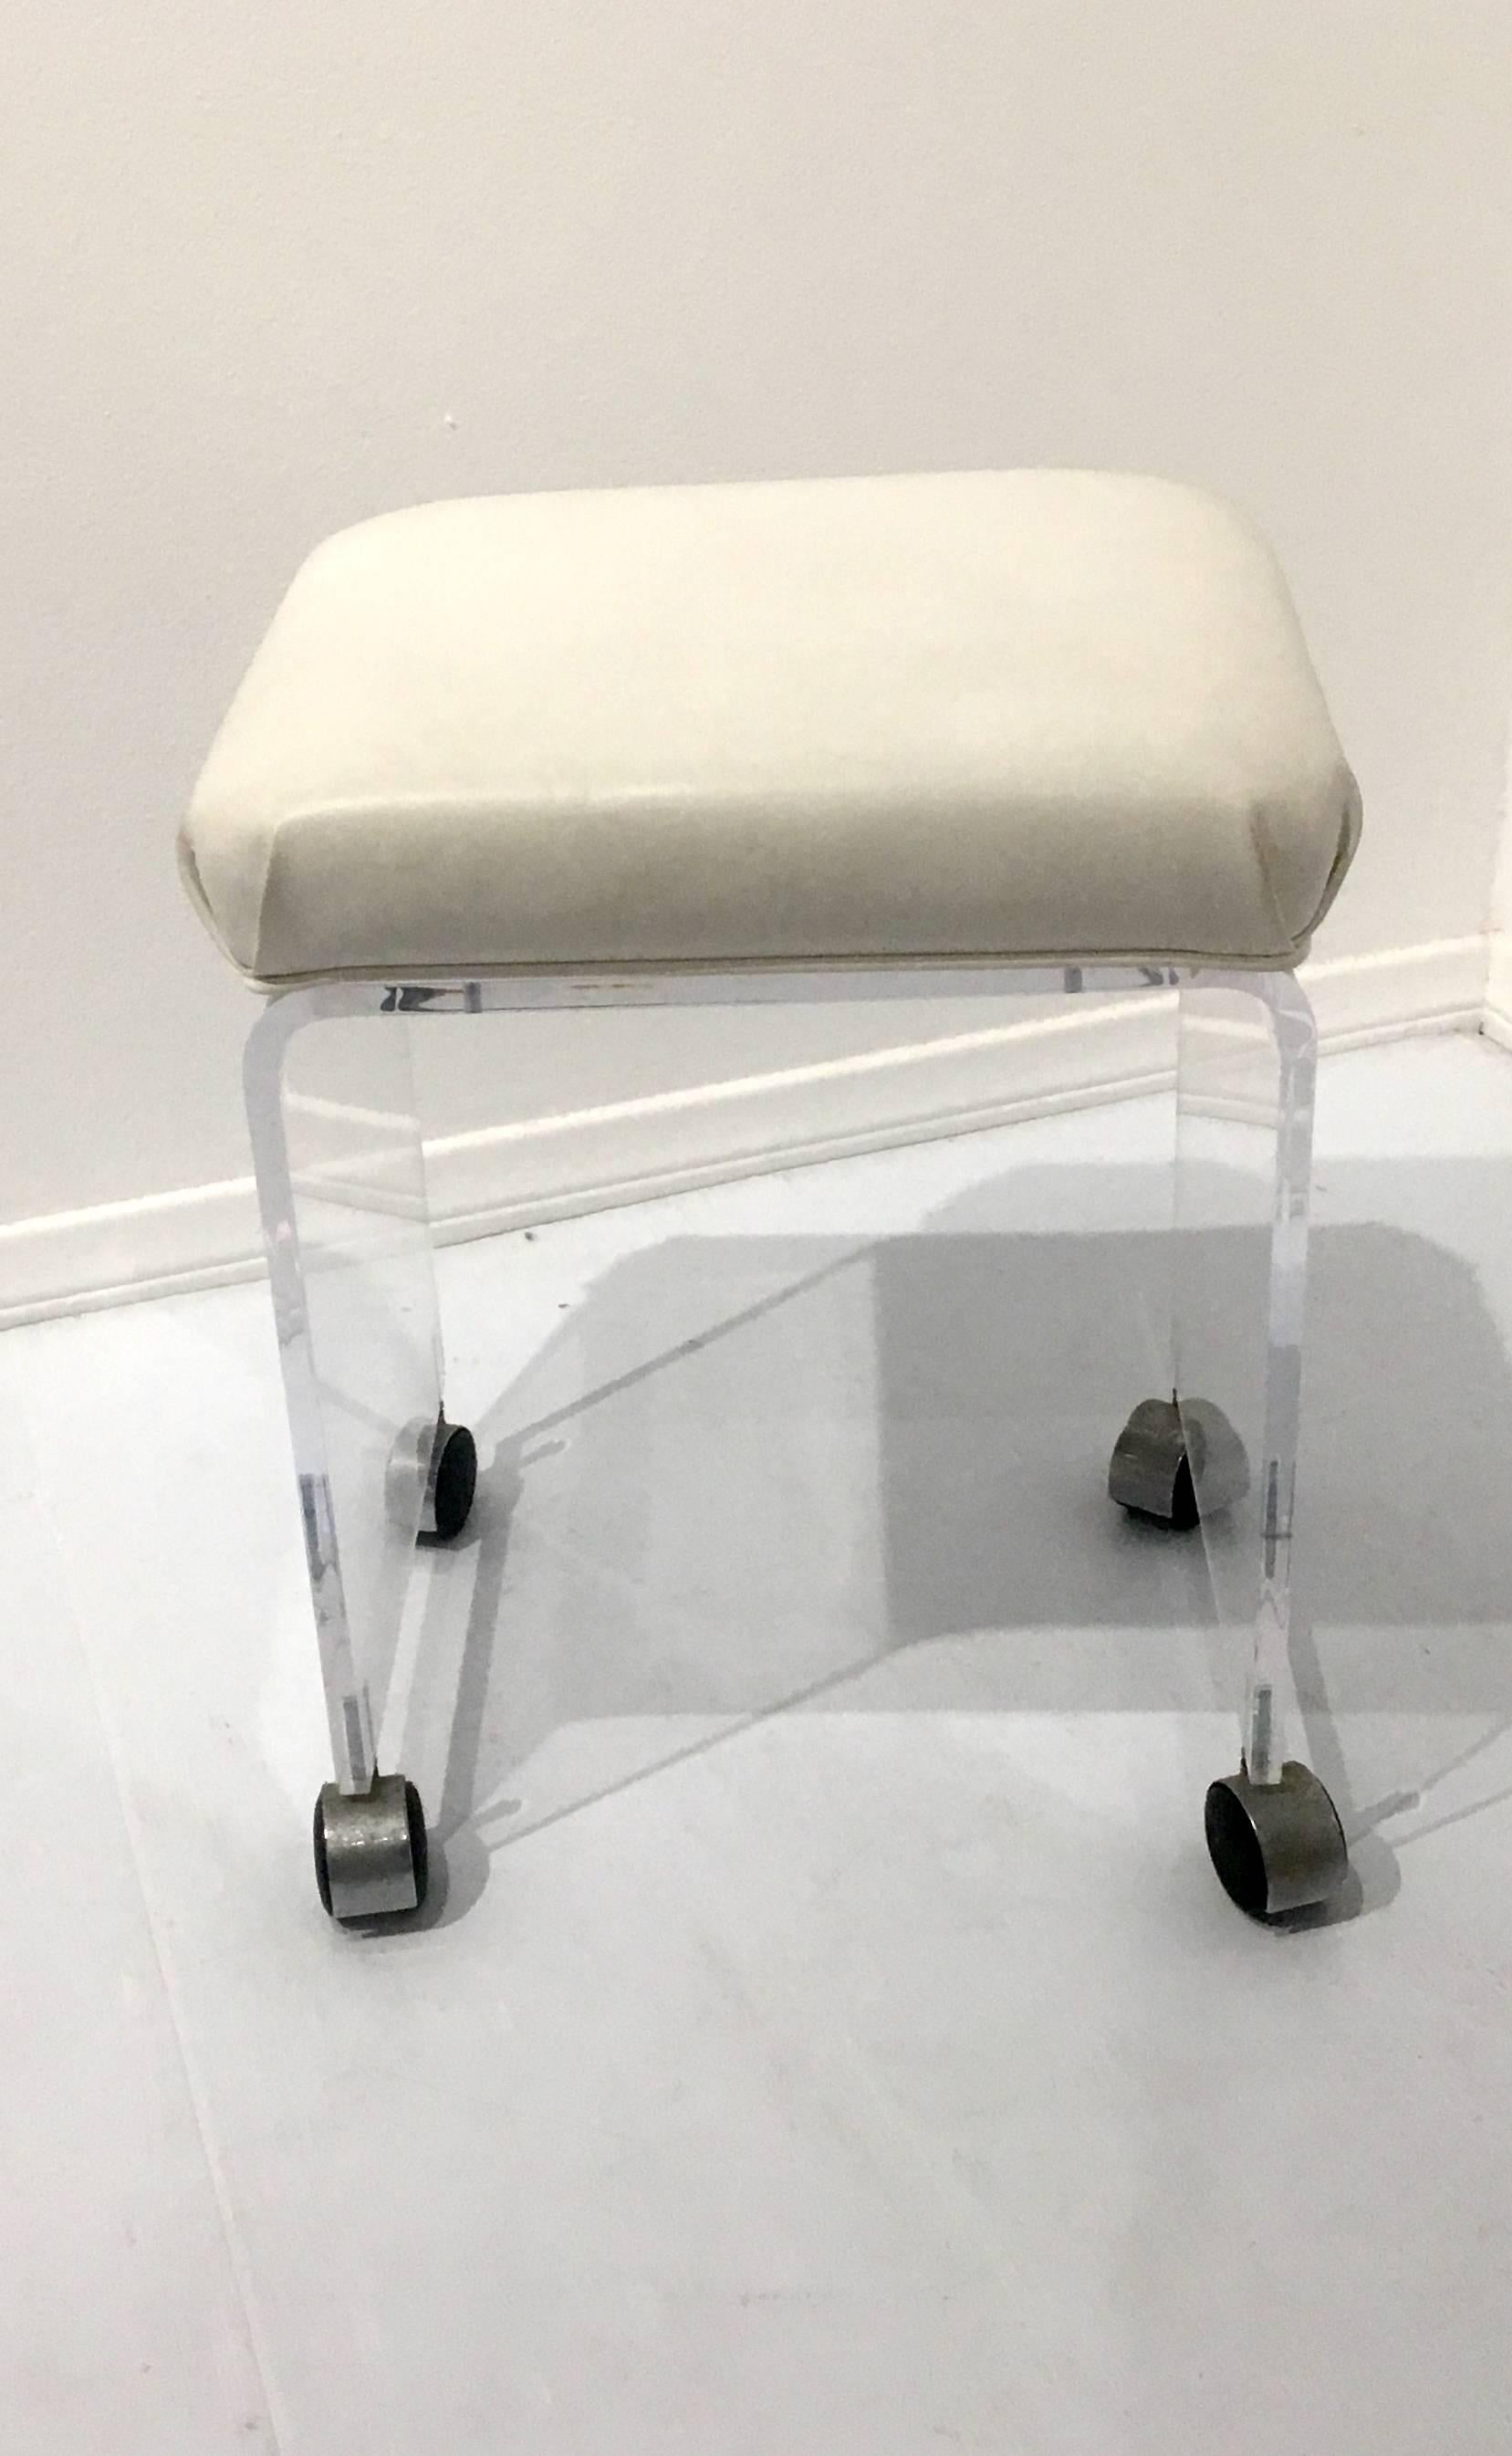 Versatile solid Lucite waterfall vanity stool, with chrome casters circa 1970s. In white Naugahyde nice and clean condition with chrome casters.